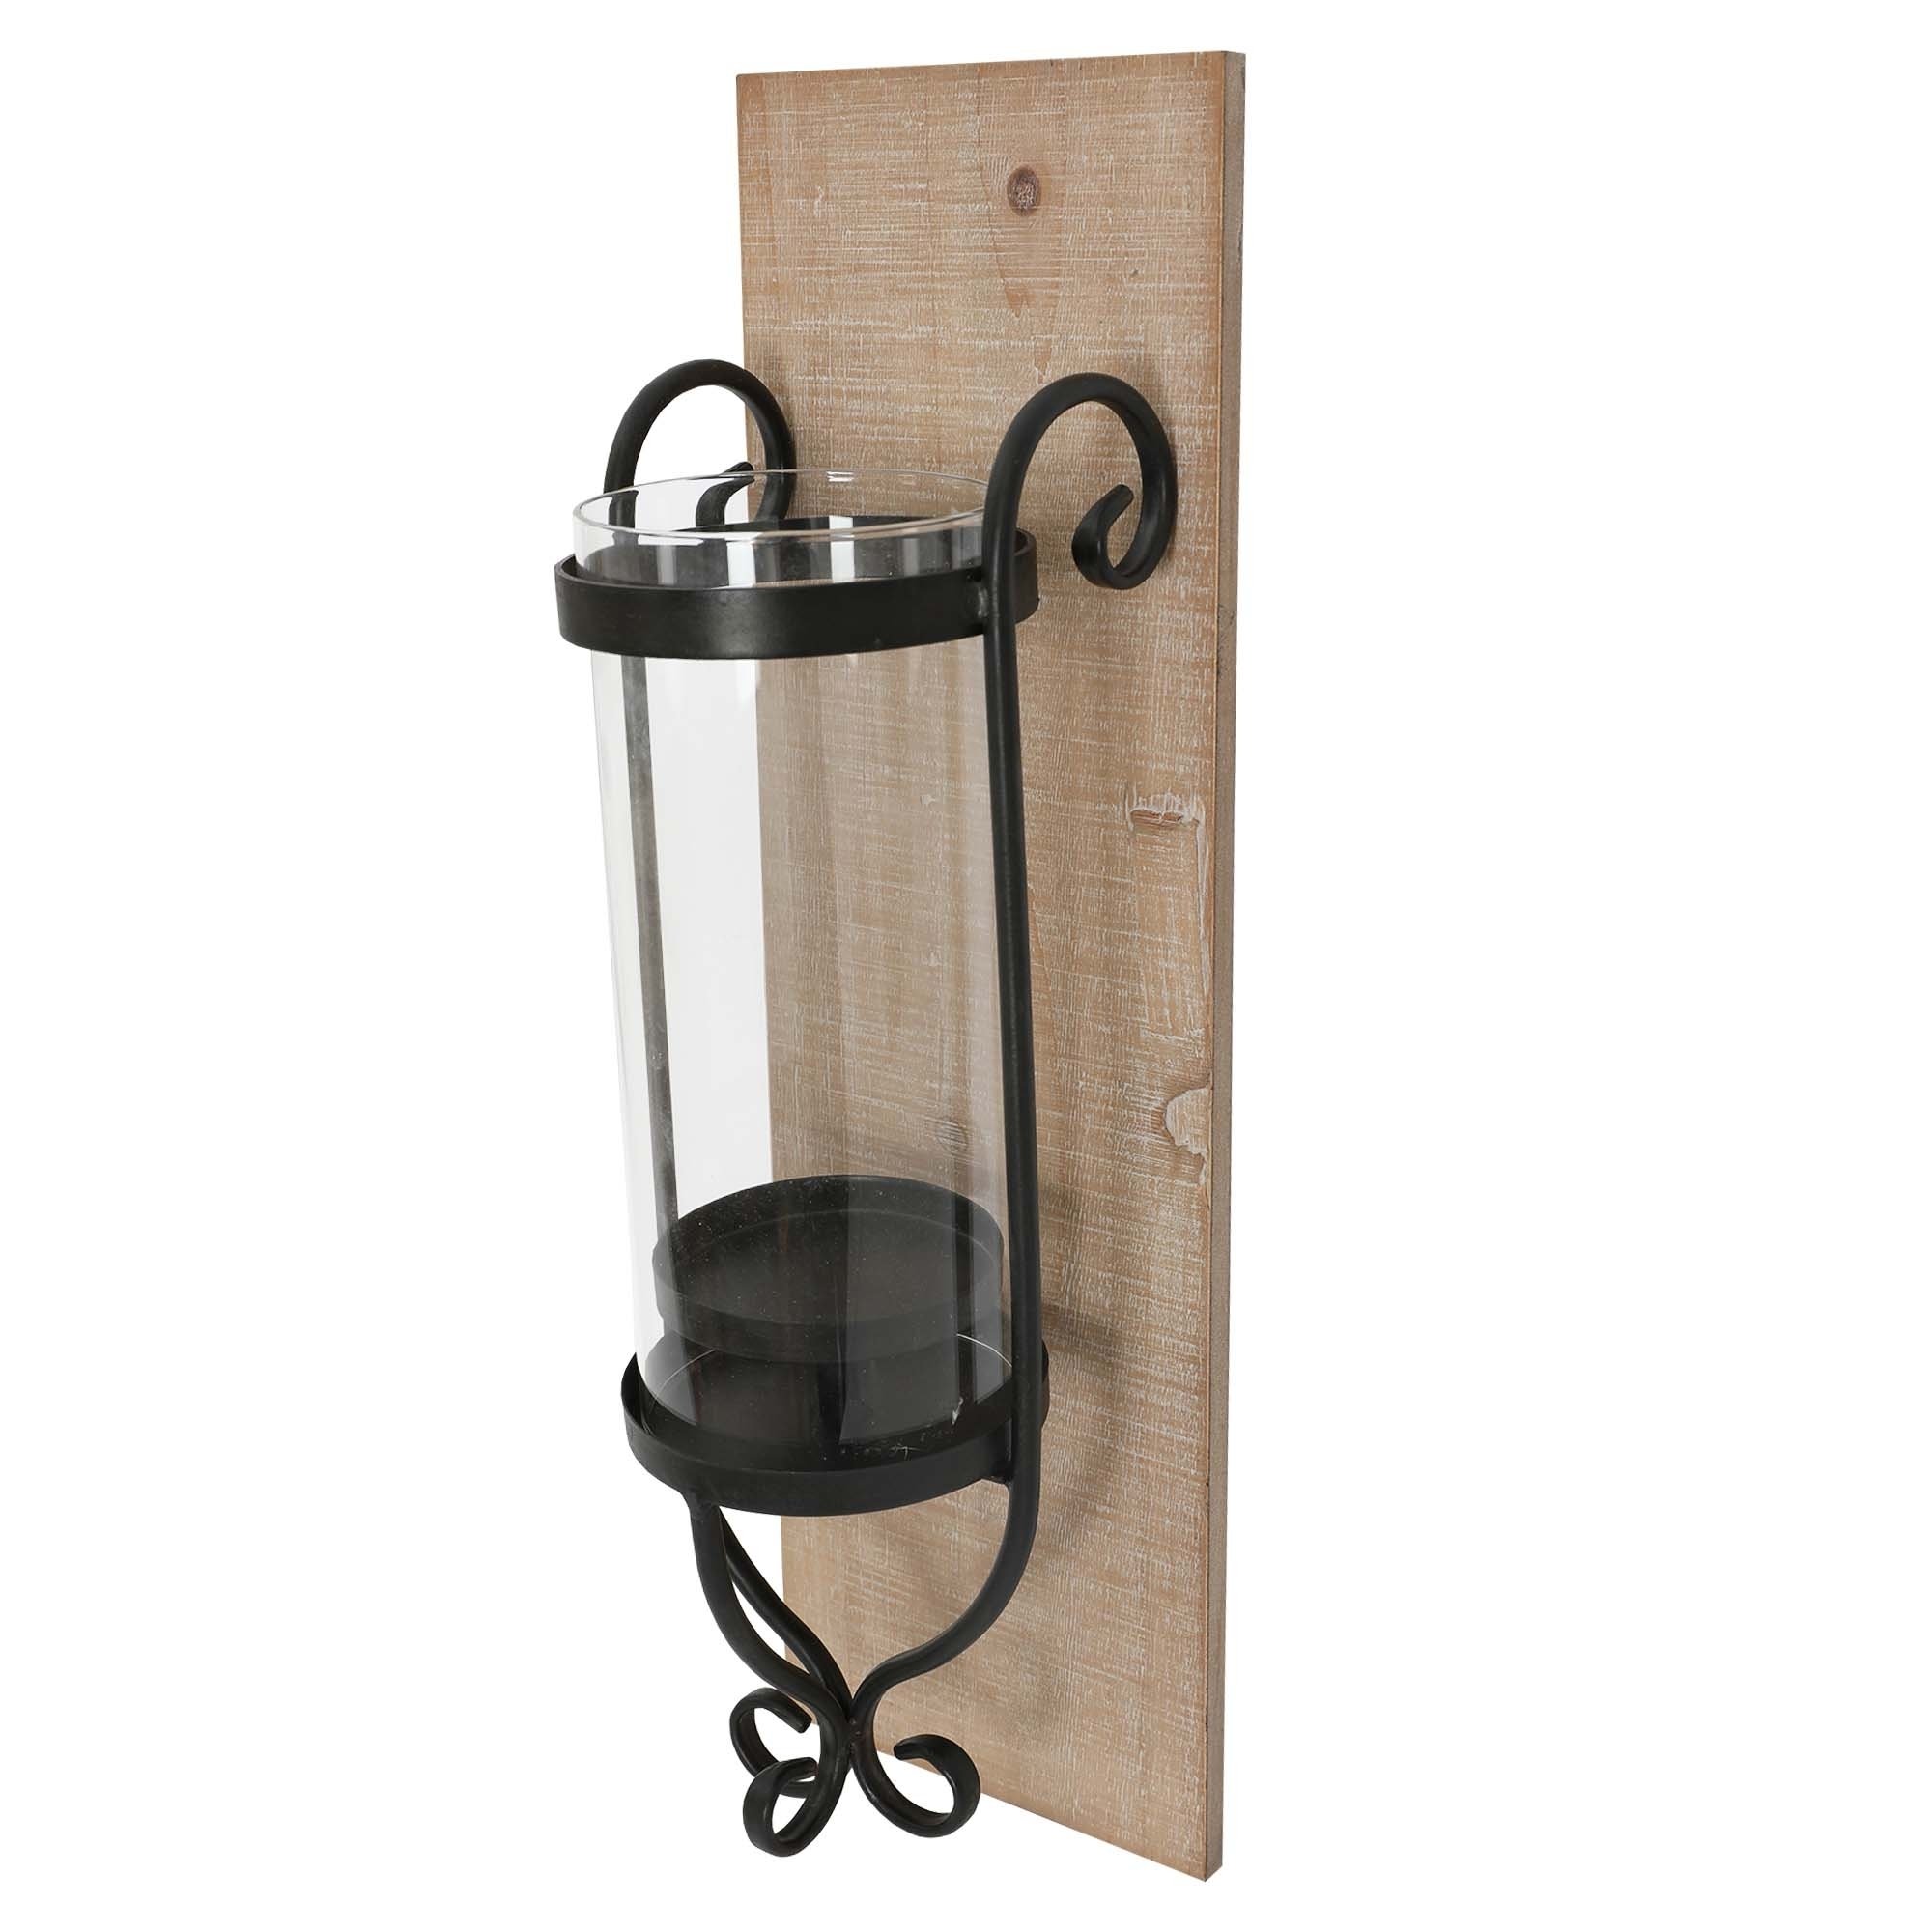 21 Inch Industrial Wall Mount Wood Candle Holder With Glass Hurrican, Set Of 2, Black - Saltoro Sherpi